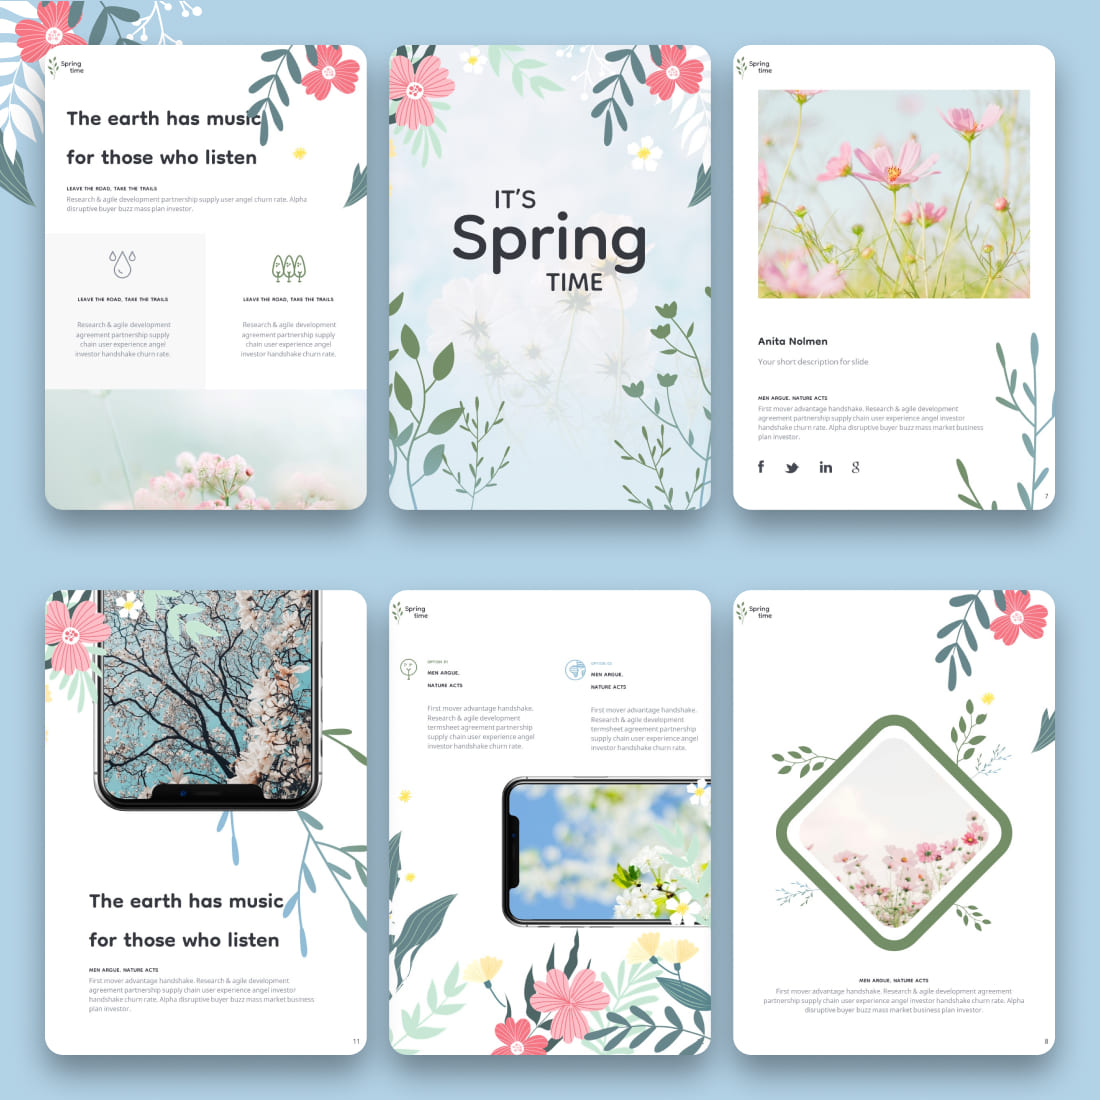 A set of images of unique presentation slides on the theme of spring.